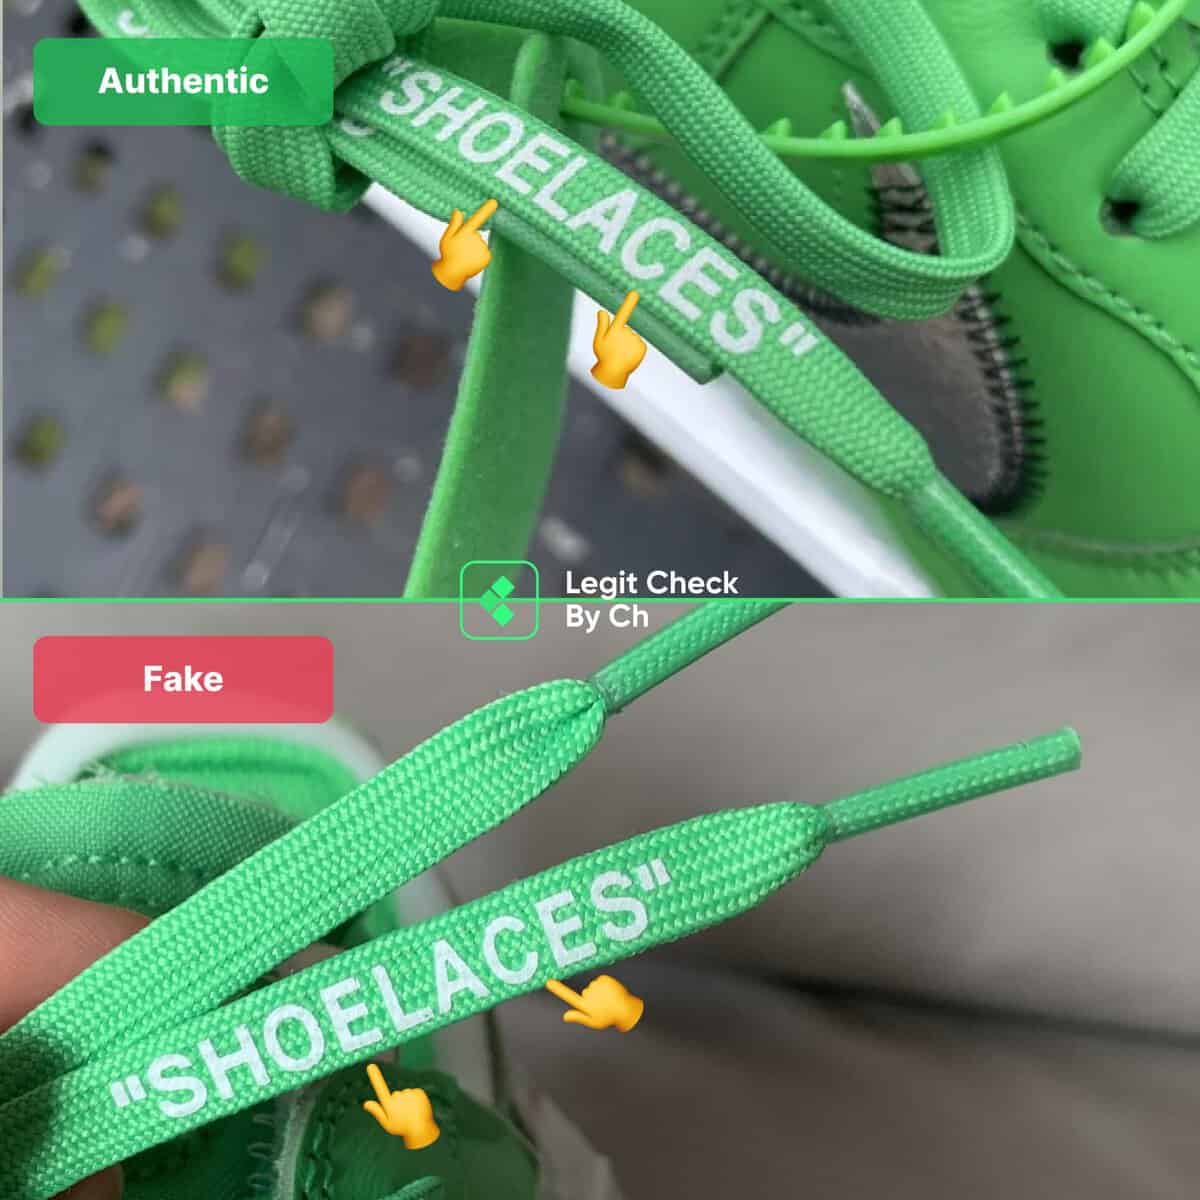 OFF WHITE AIR FORCE 1 BROOKLYN 💚💚💚ON FEET REP REVIEW 💚💚💚 IG:@upshoe88  